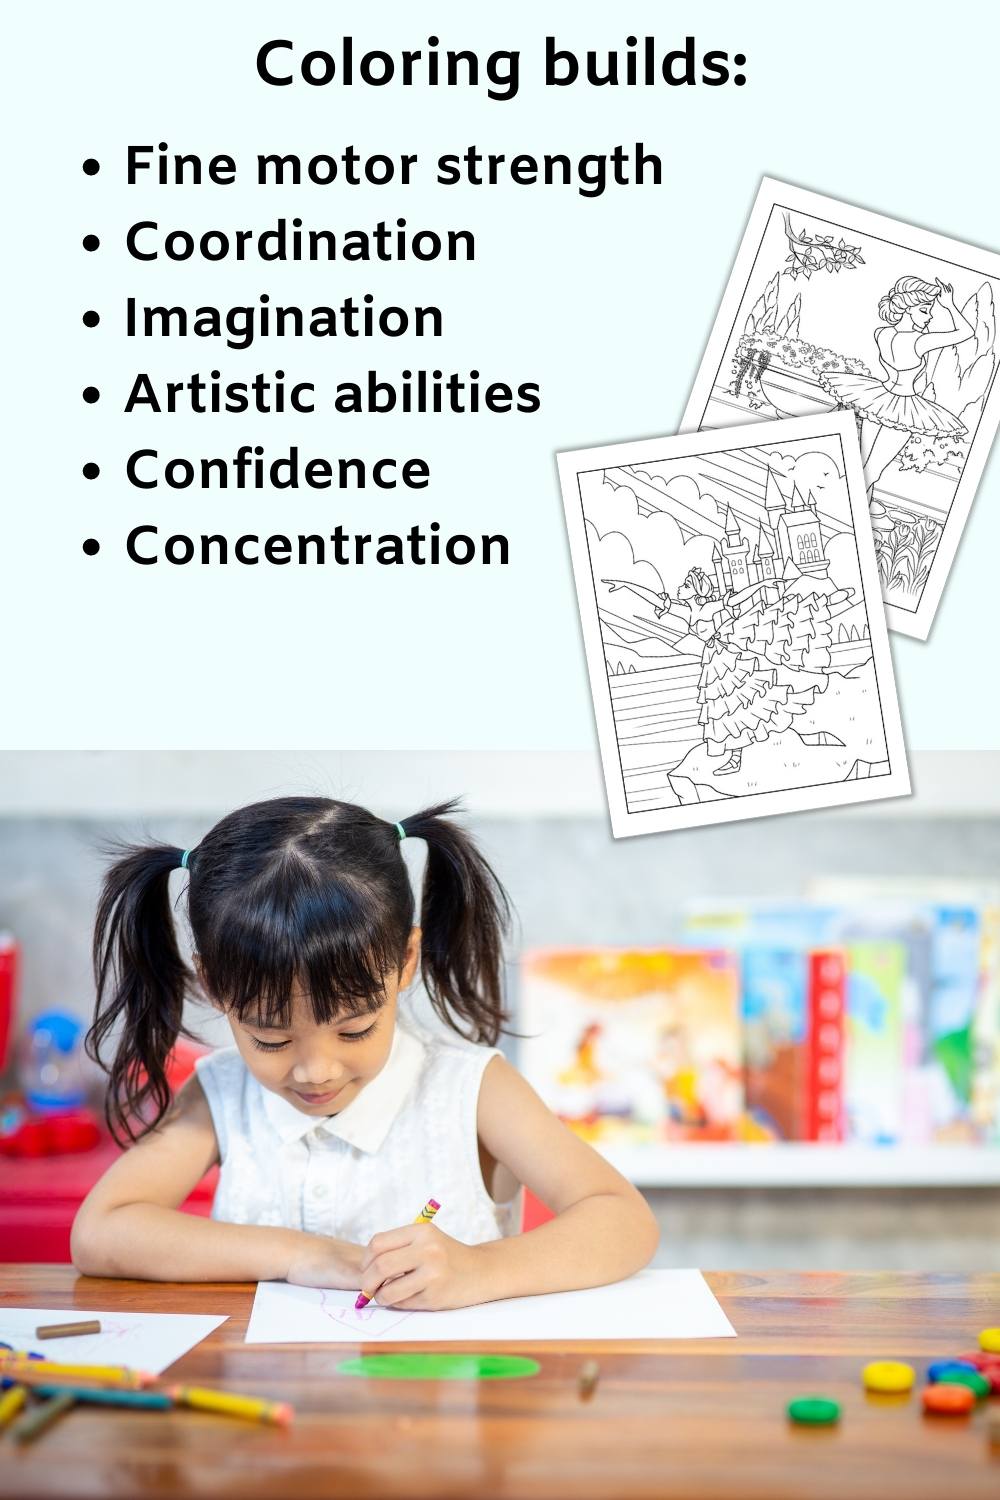 An infographic about the benefits of coloring